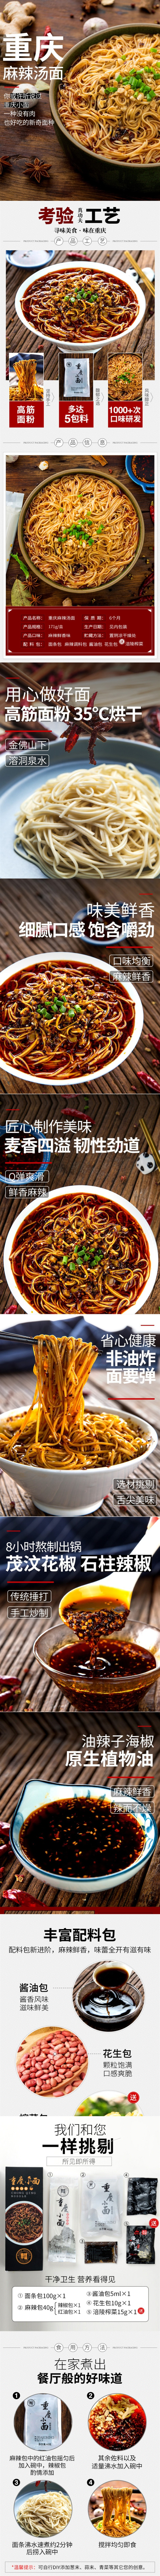 Chongqing noodles Spicy soup noodles174g